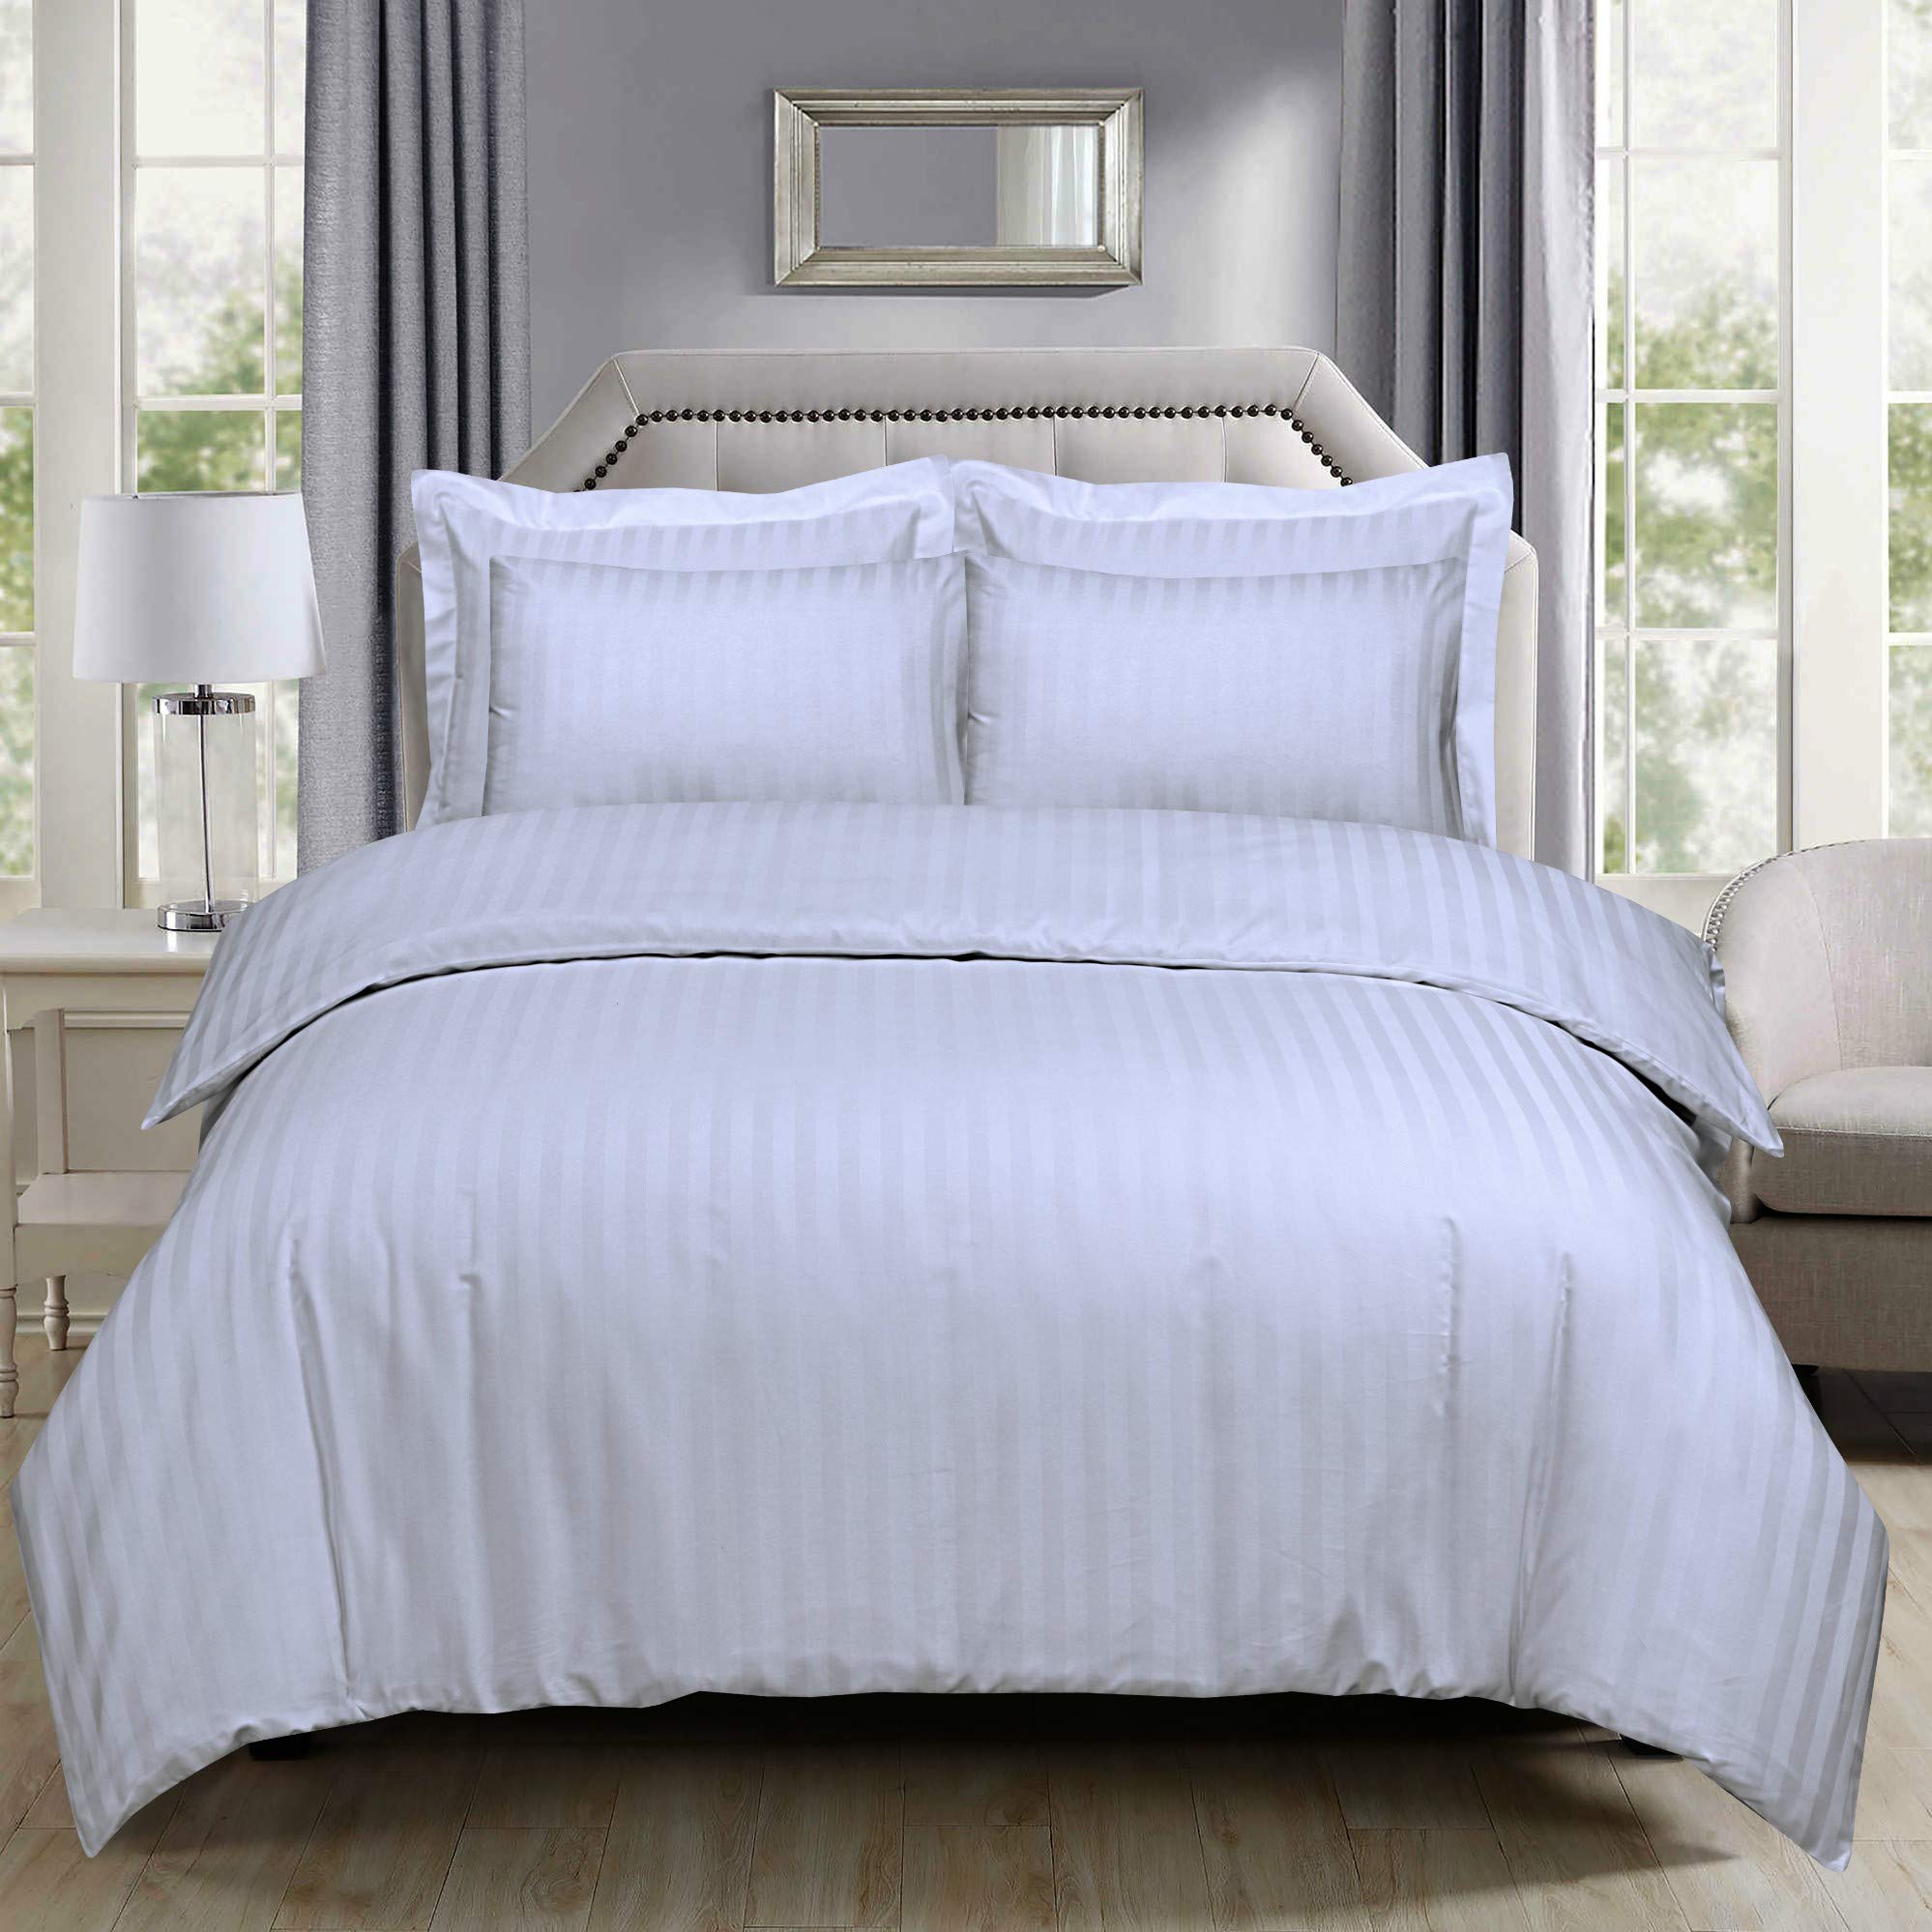 DTEX HOMES 300 Thread Count 100% Egyptian Cotton Satin Stripes Super King Duvet Cover Set Hotel Quality